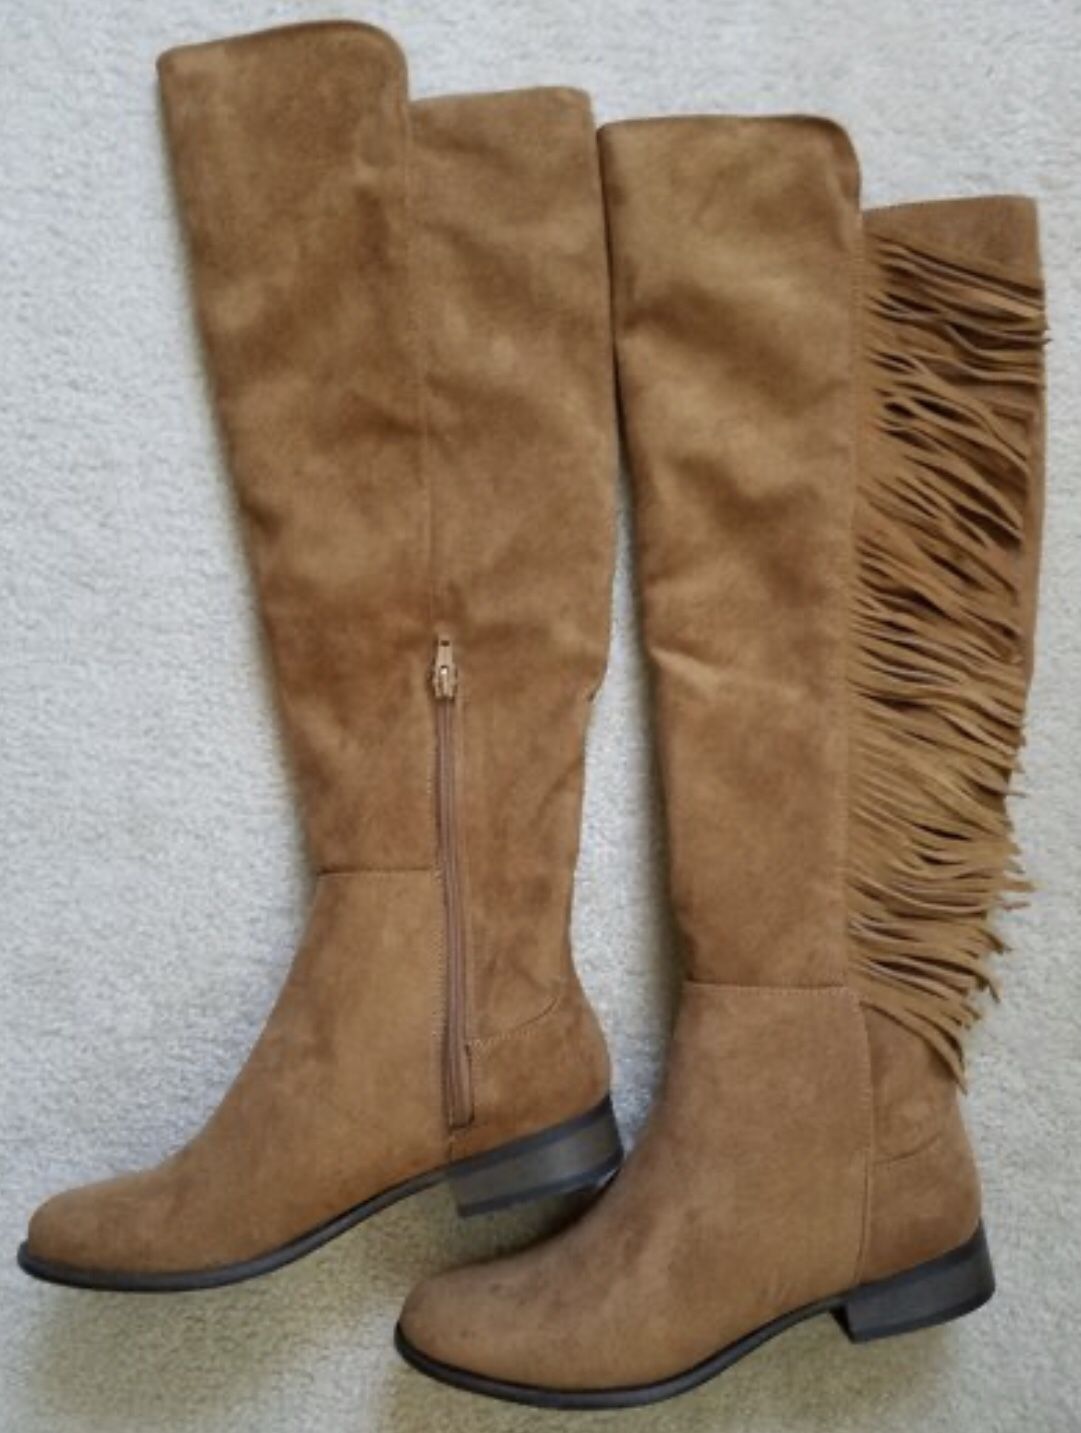 Womens Knee Boots Tan Leather w/Fringe New Size 8